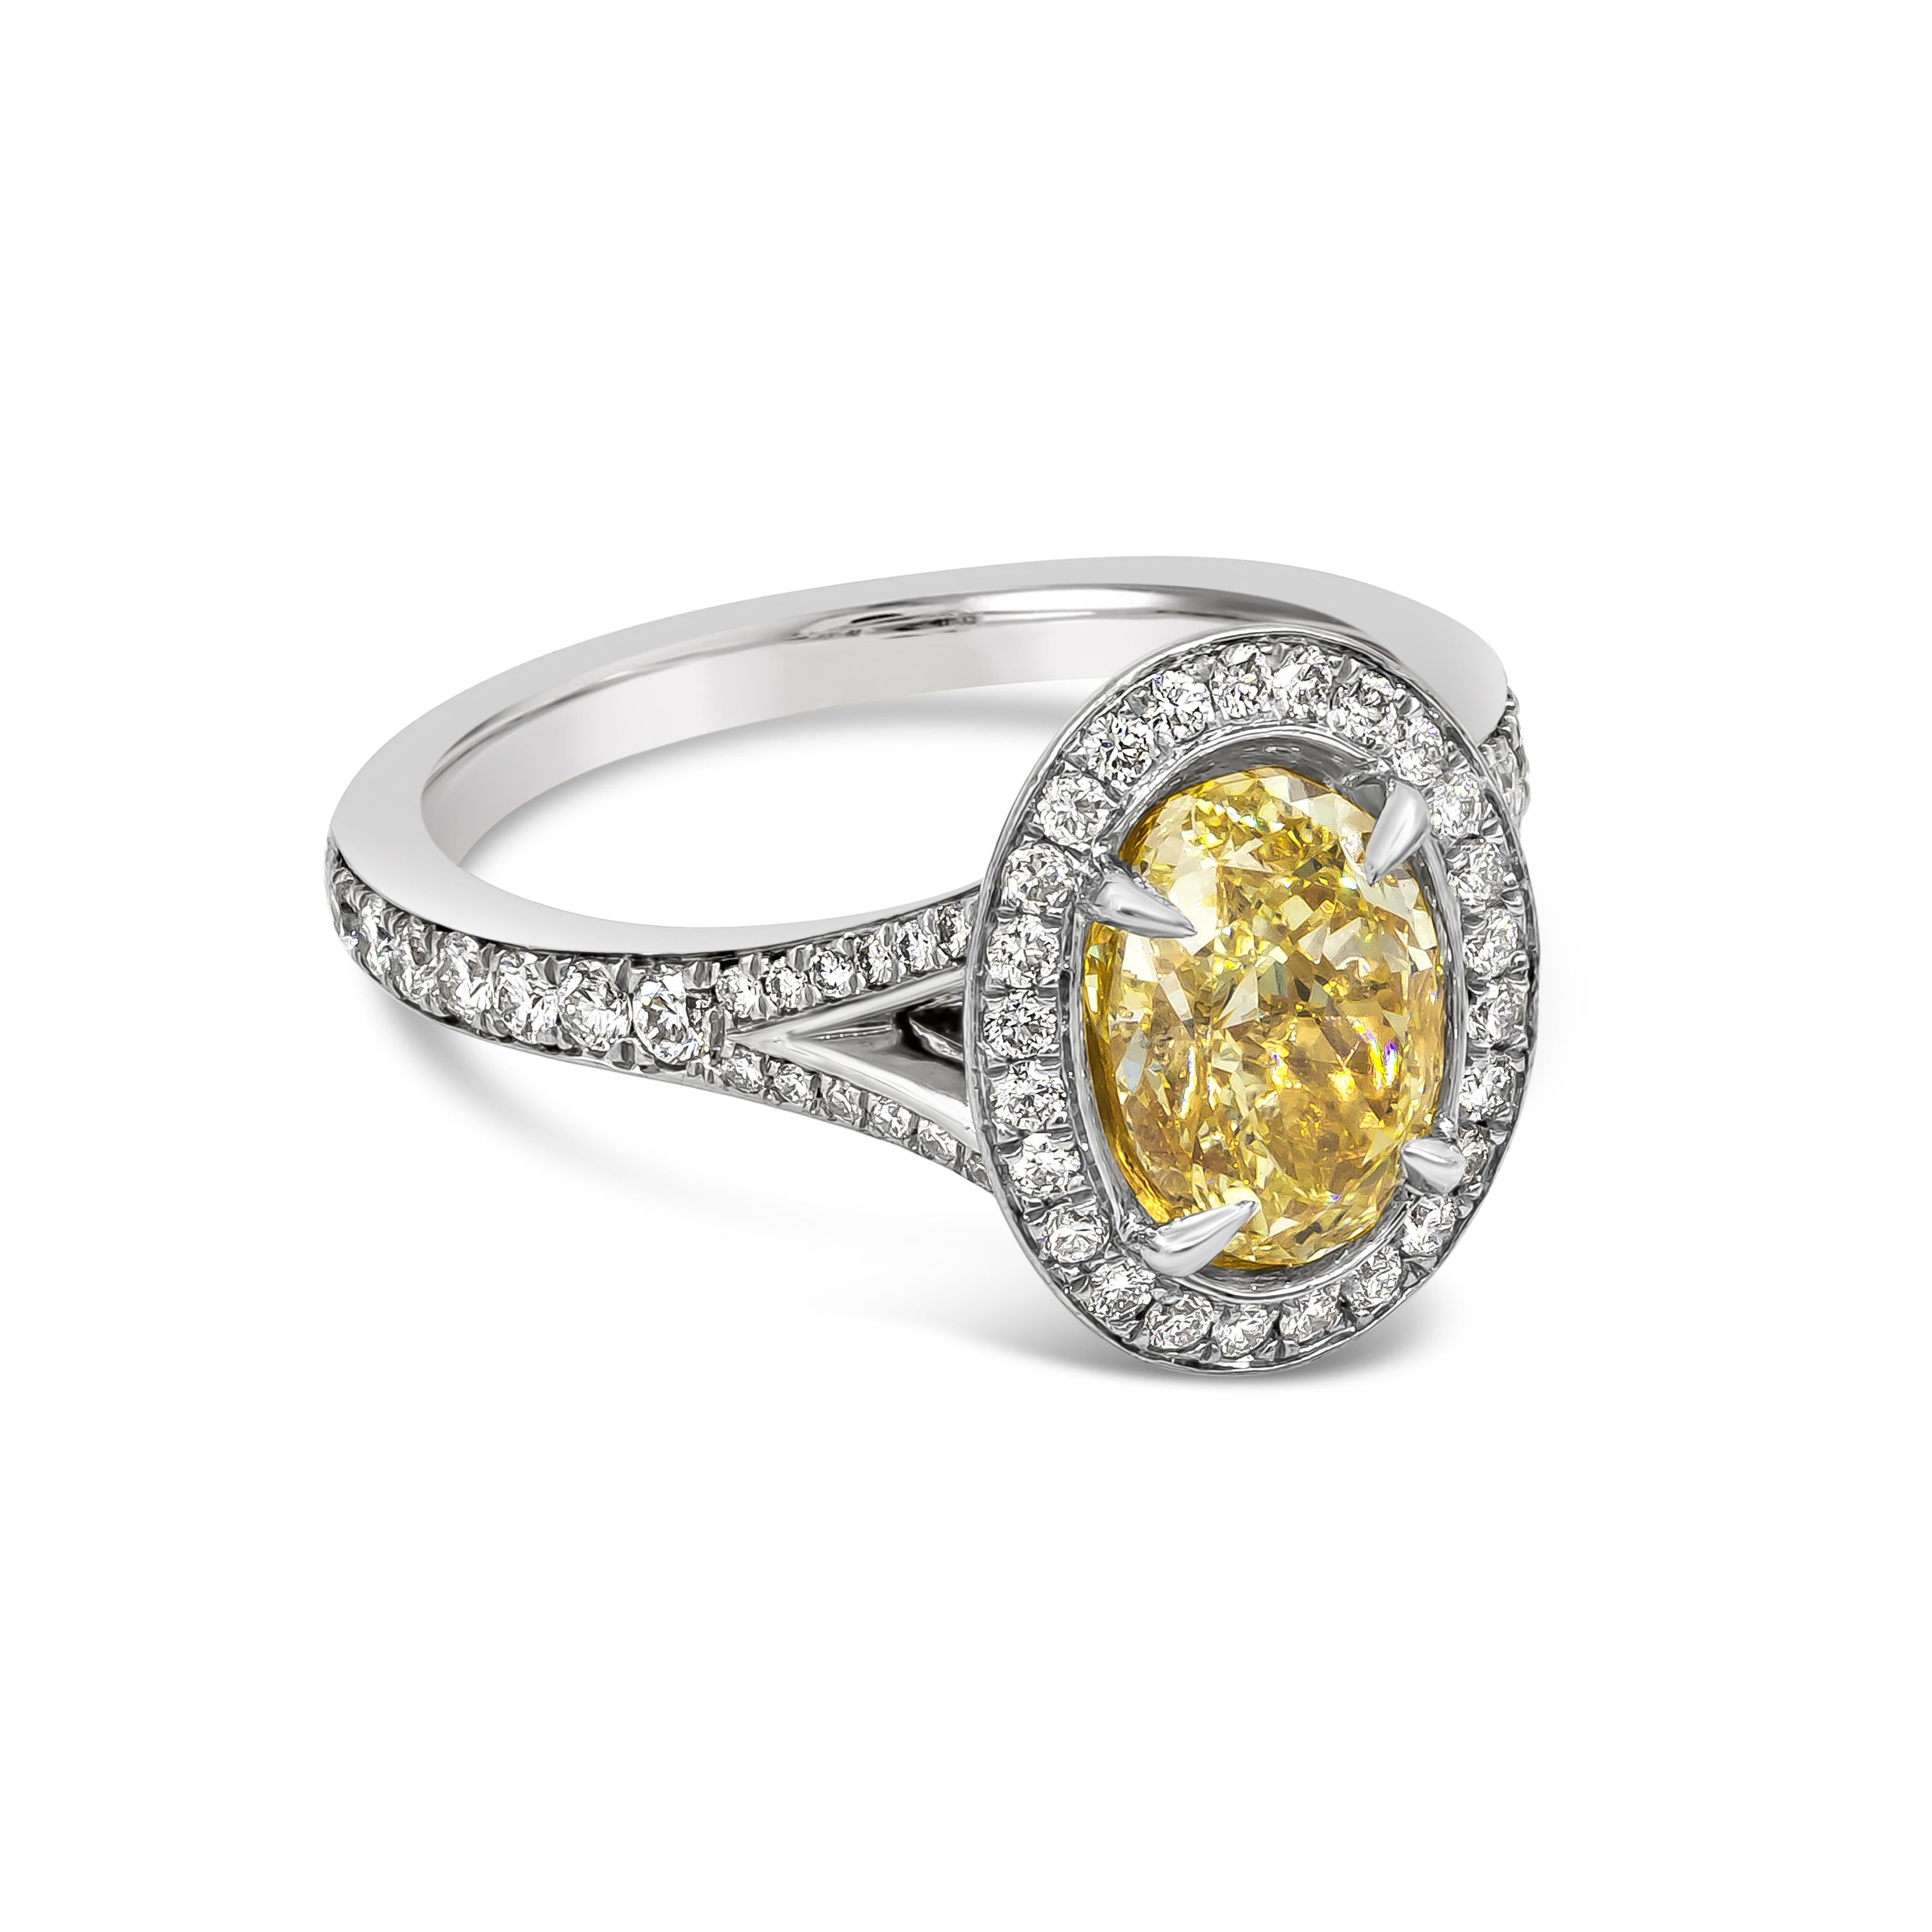 Features a GIA certified 1.76 carats color-rich oval cut Fancy Light Yellow color and VS2 in clarity, set in four prong setting. Surrounded by a single row of round brilliant diamonds in halo bezel setting. Set in a semi-split shank diamond